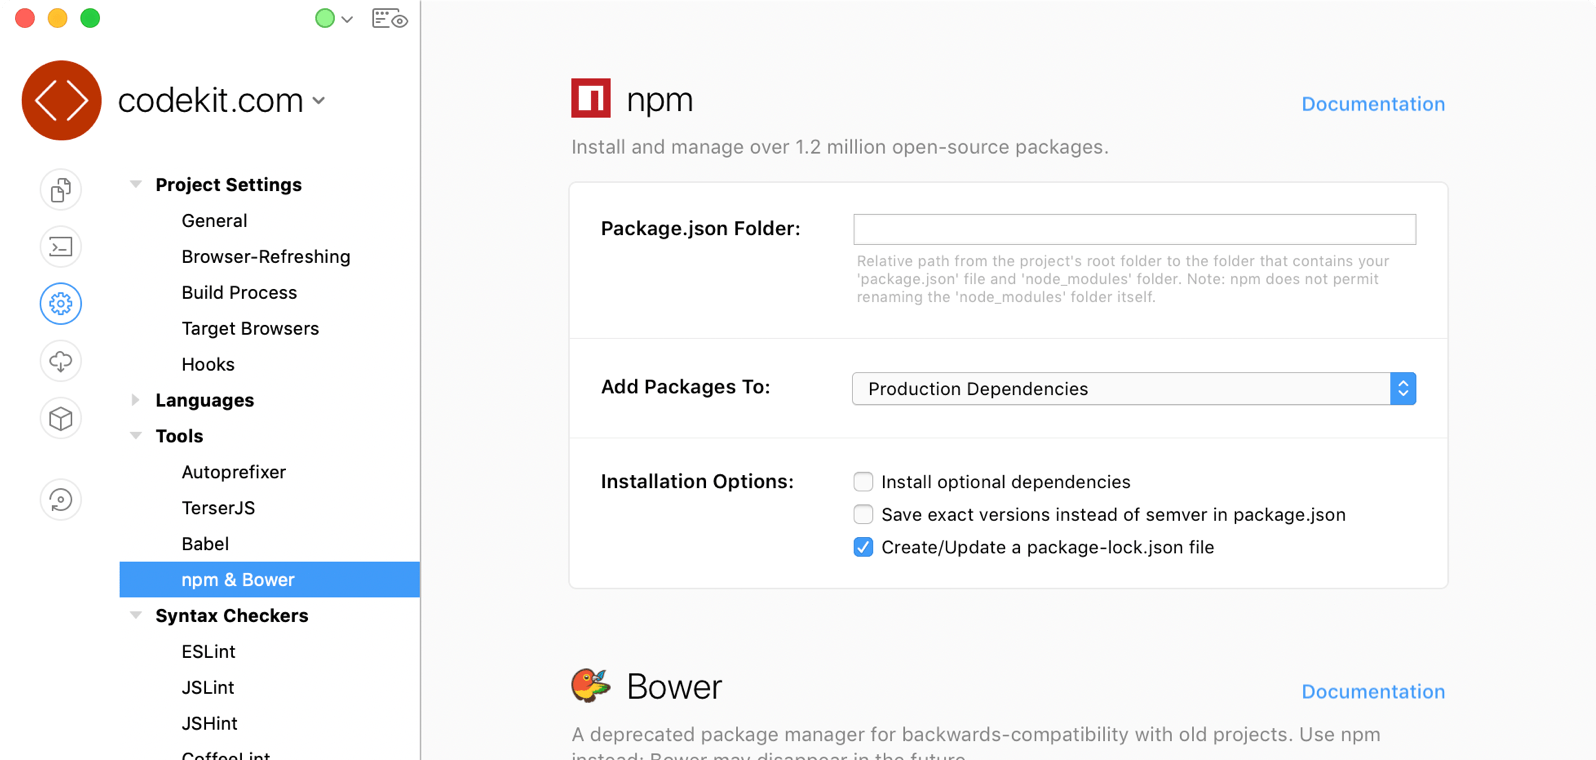 A screenshot of the npm and Bower project settings in the CodeKit window